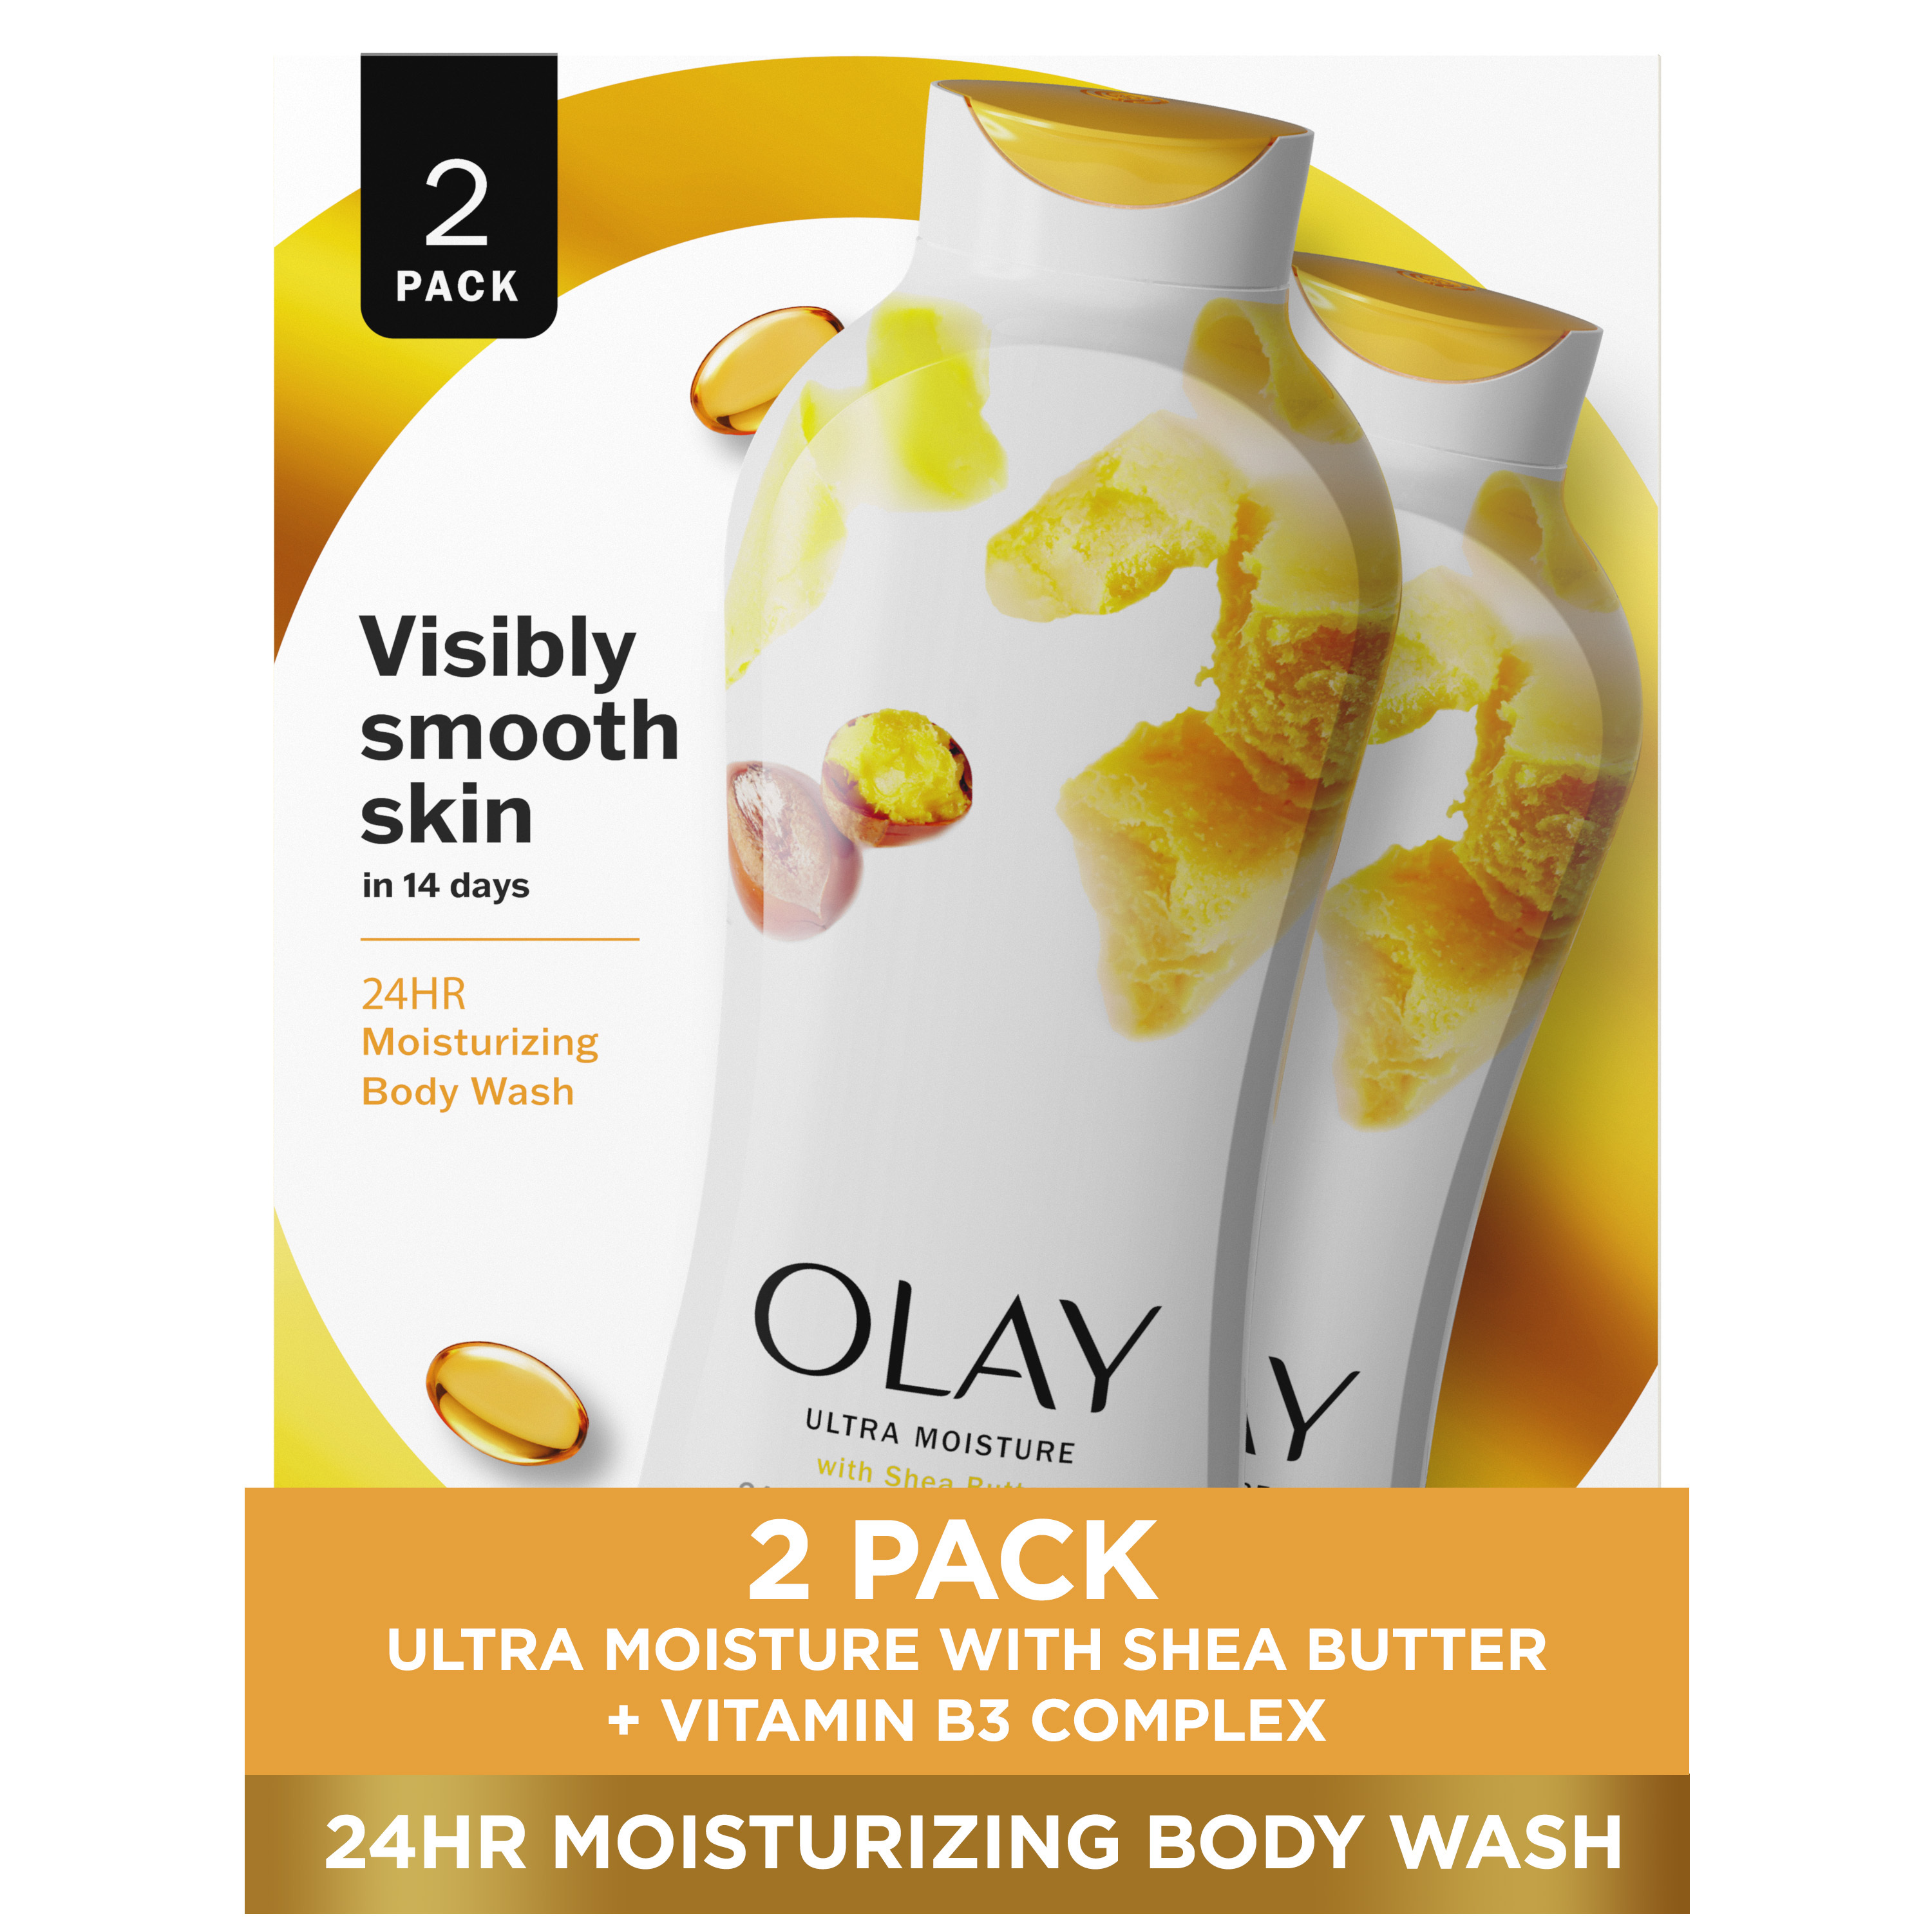 Olay Ultra Moisture Body Wash with Shea Butter, 22 fl oz, Pack of 2 - image 1 of 8